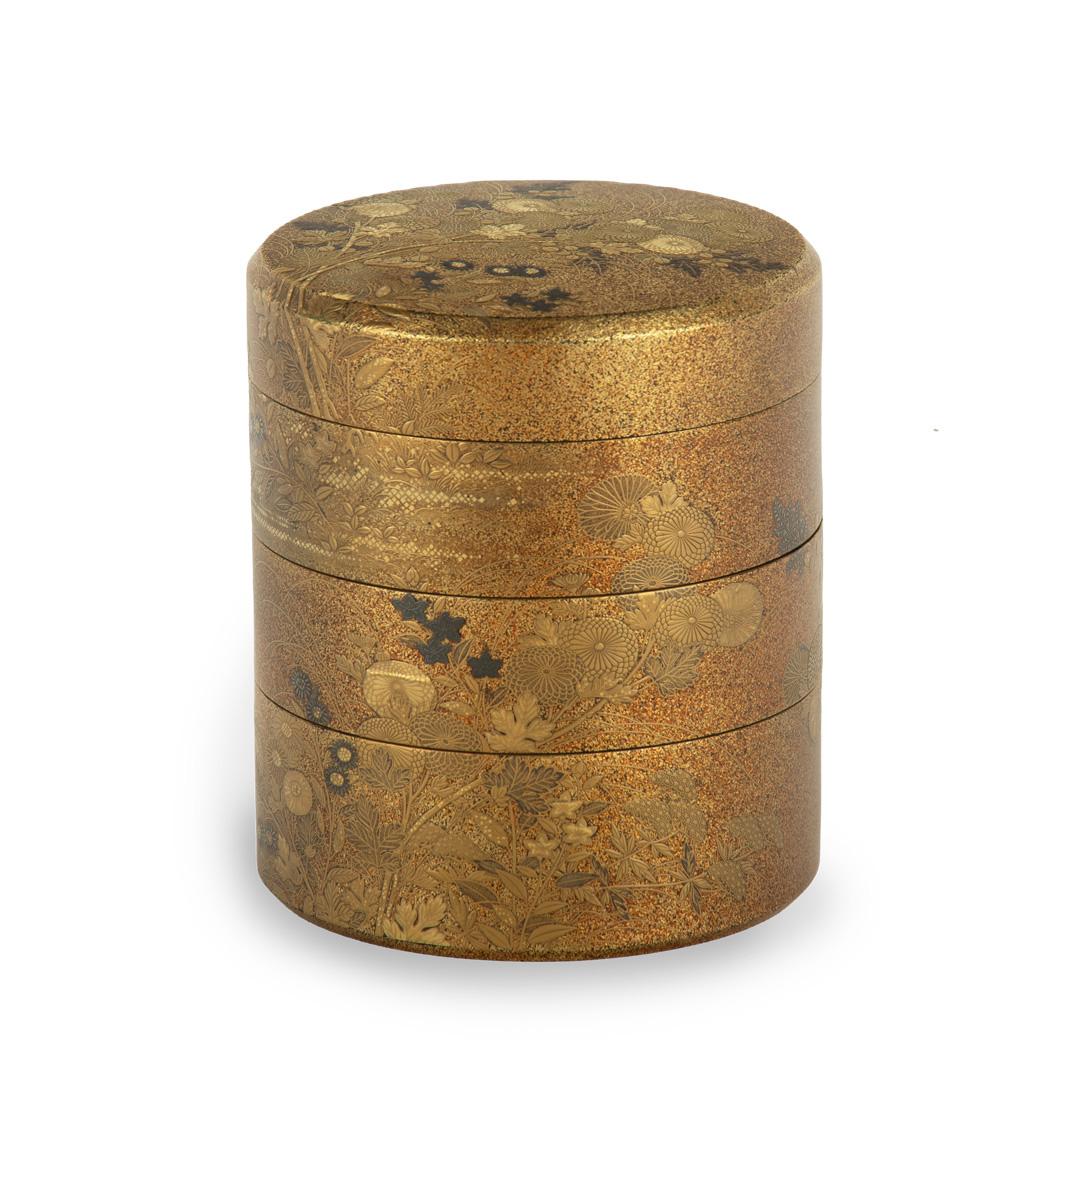 As part of our Japanese works of art collection we are delighted to offer this beautiful Meiji Period (1868-1912) gold lacquer stacking cosmetics box (Ju- Kobako) this delightful cylindrical lacquer box consists of three graduated compartments each